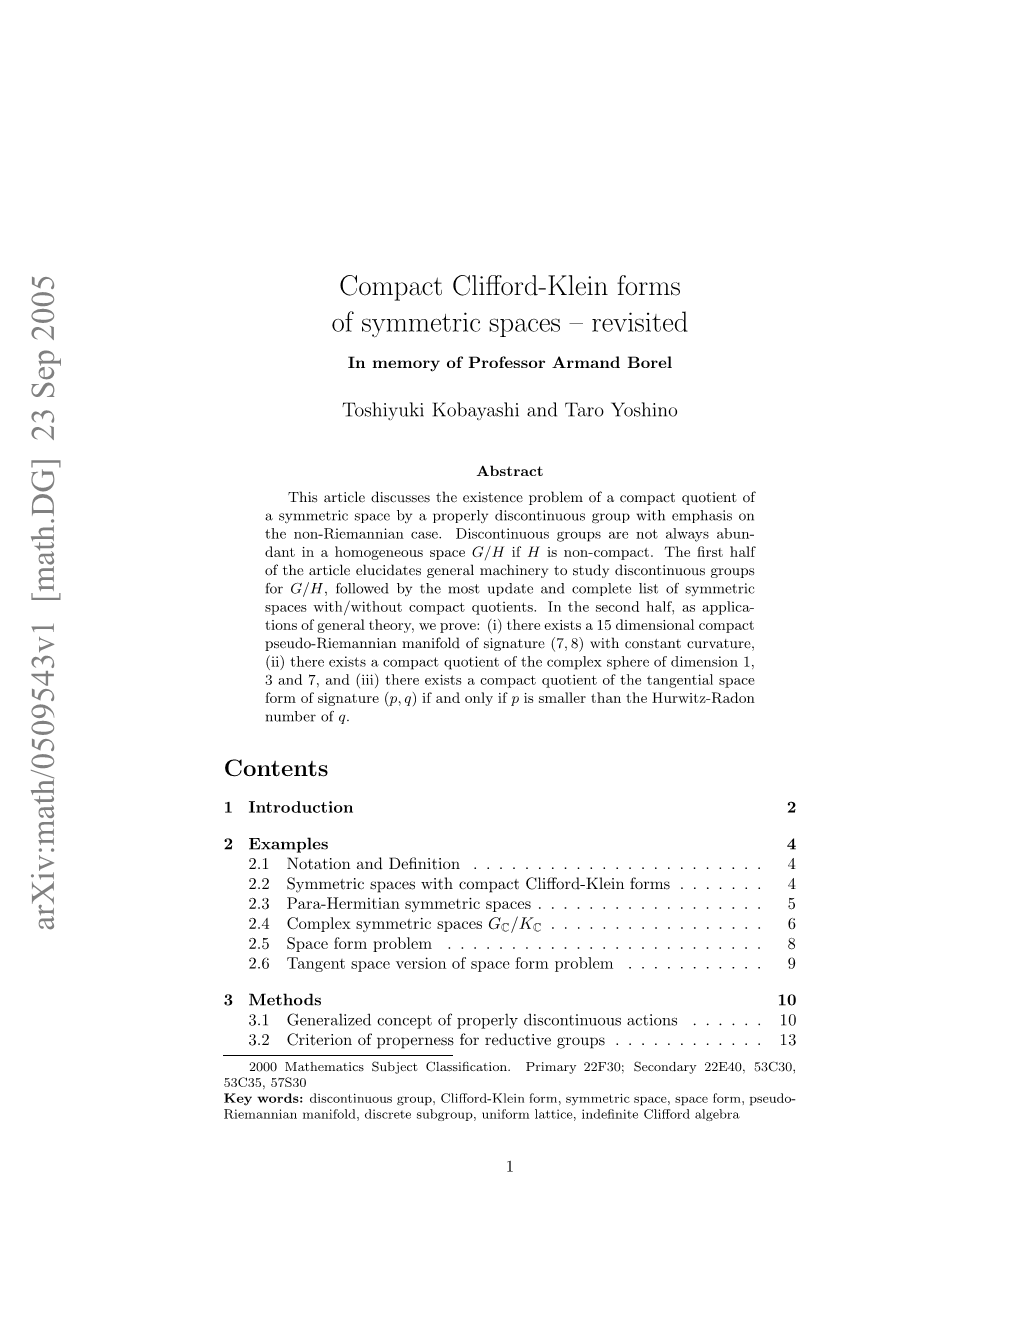 Compact Clifford-Klein Forms of Symmetric Spaces